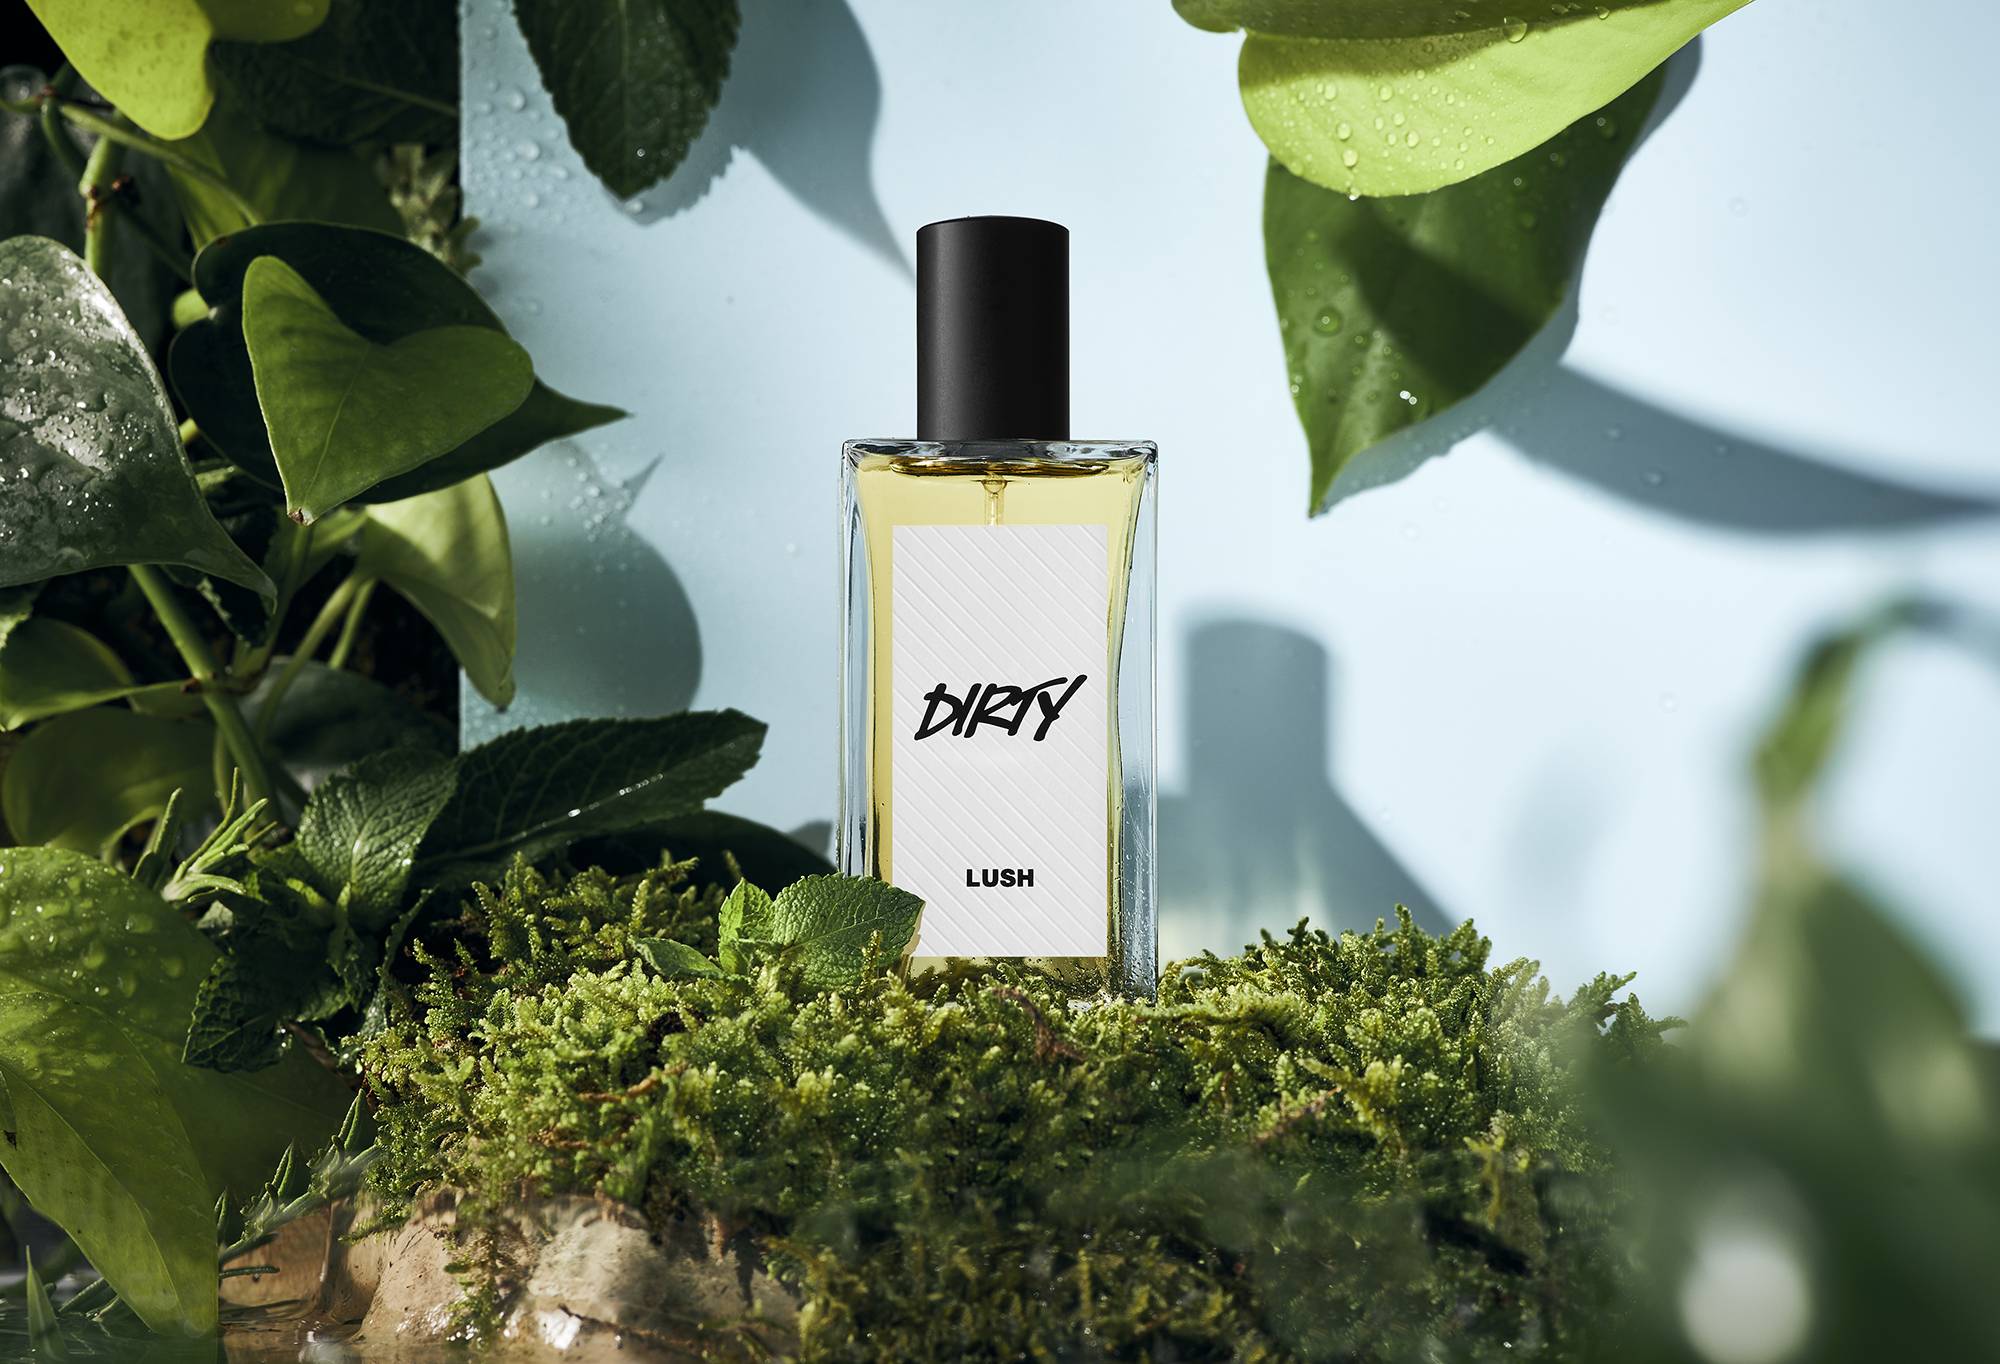 Dirty perfume is placed on green grass. Green leaves with water droplets are draped in the corners on a blue backdrop.